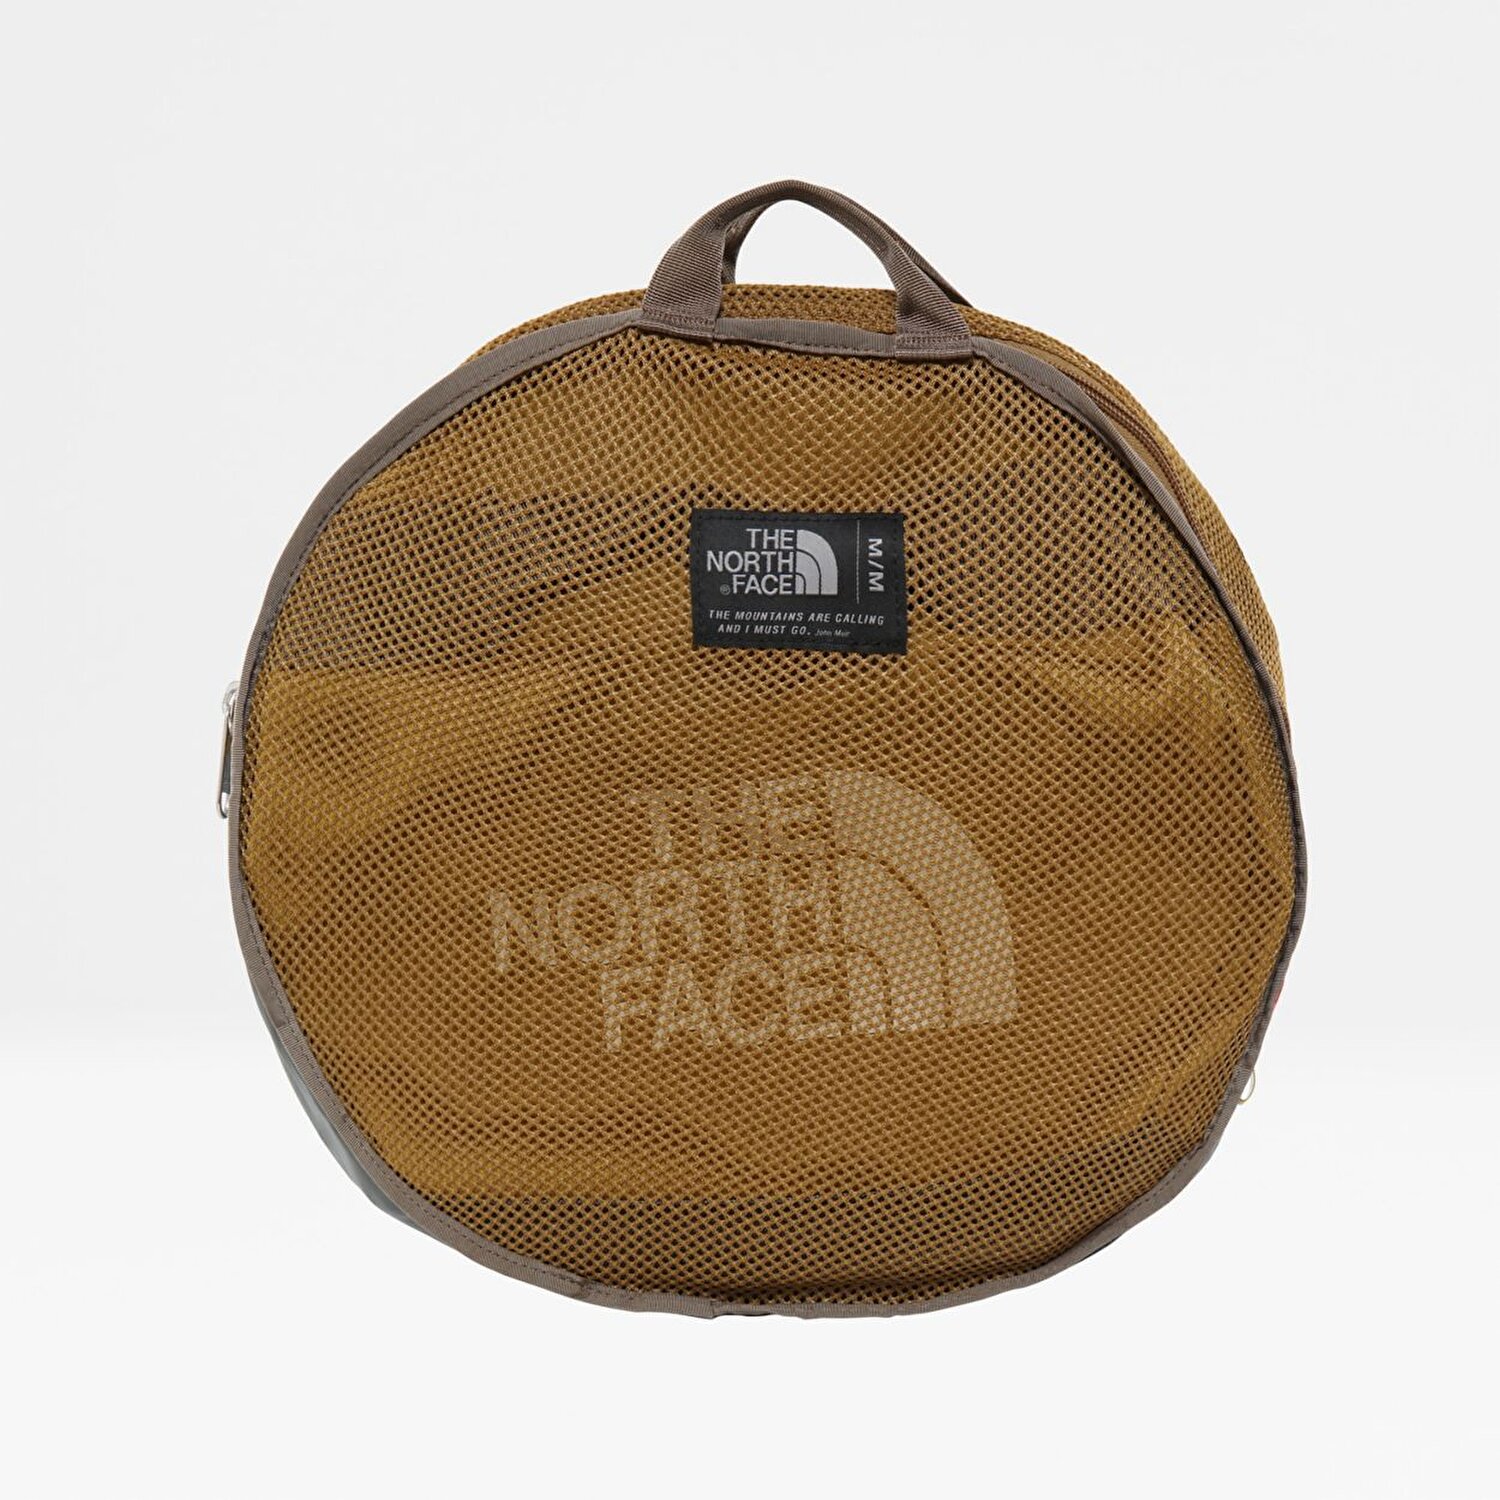 The North Face BASE CAMP DUFFEL - M. 5